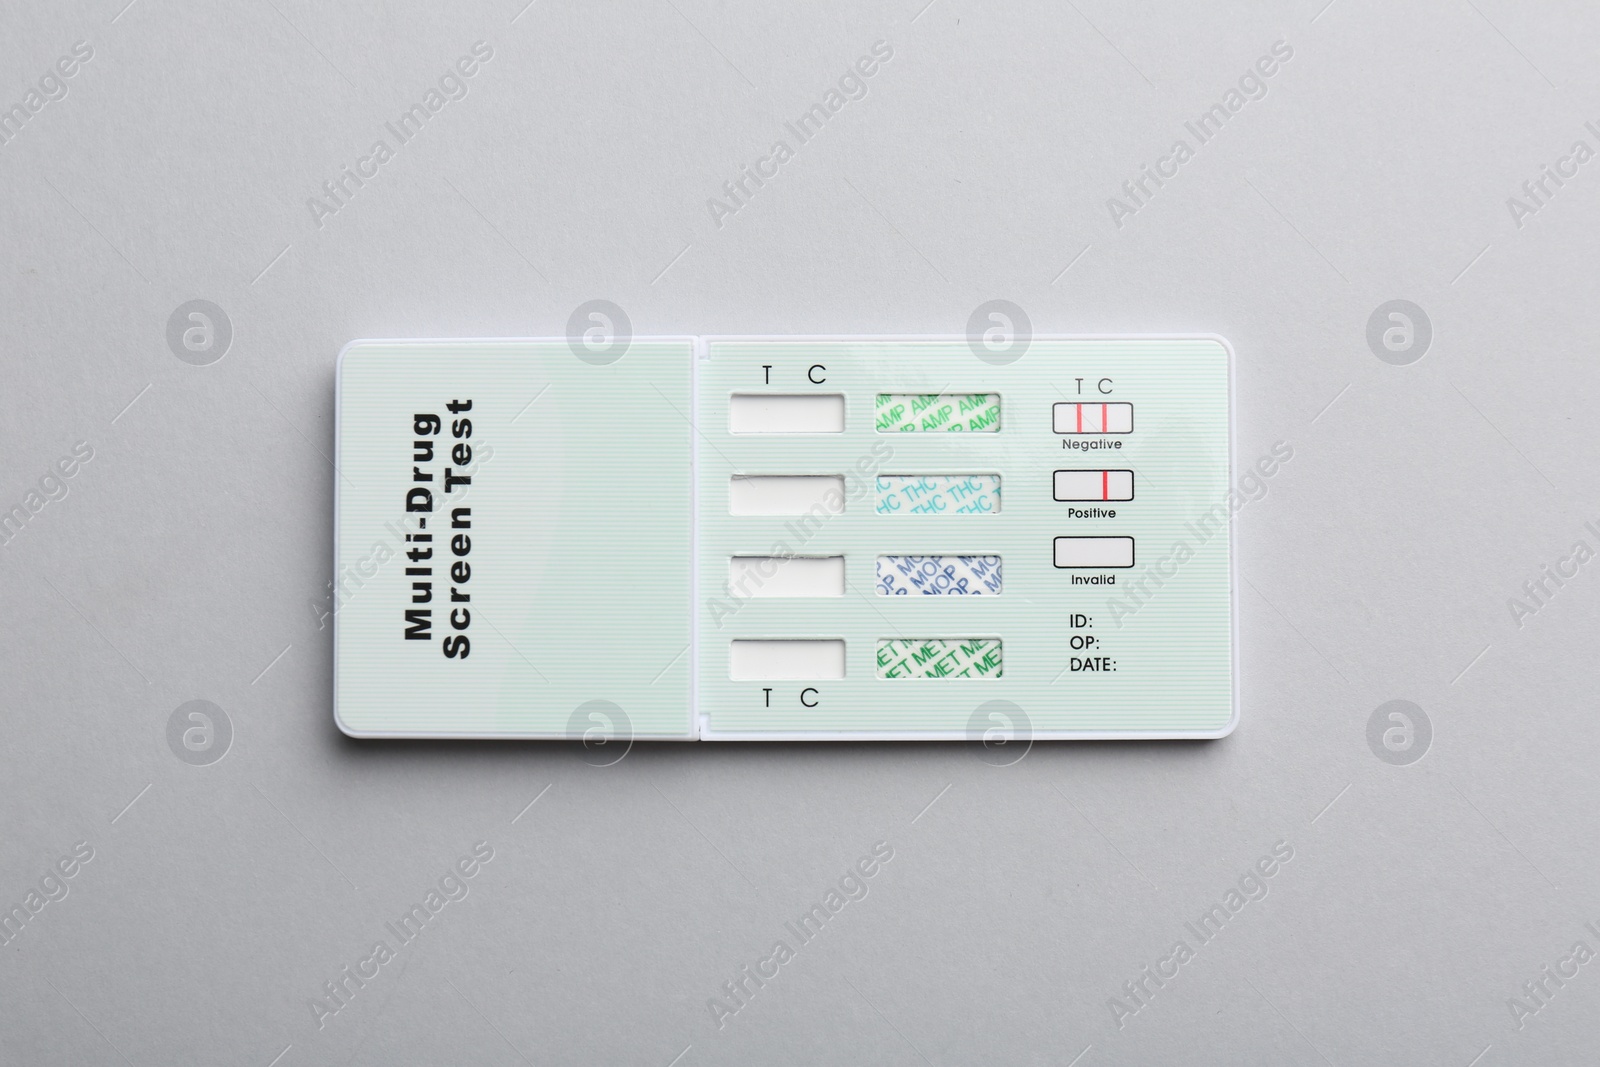 Photo of Multi-drug screen test on light grey background, top view